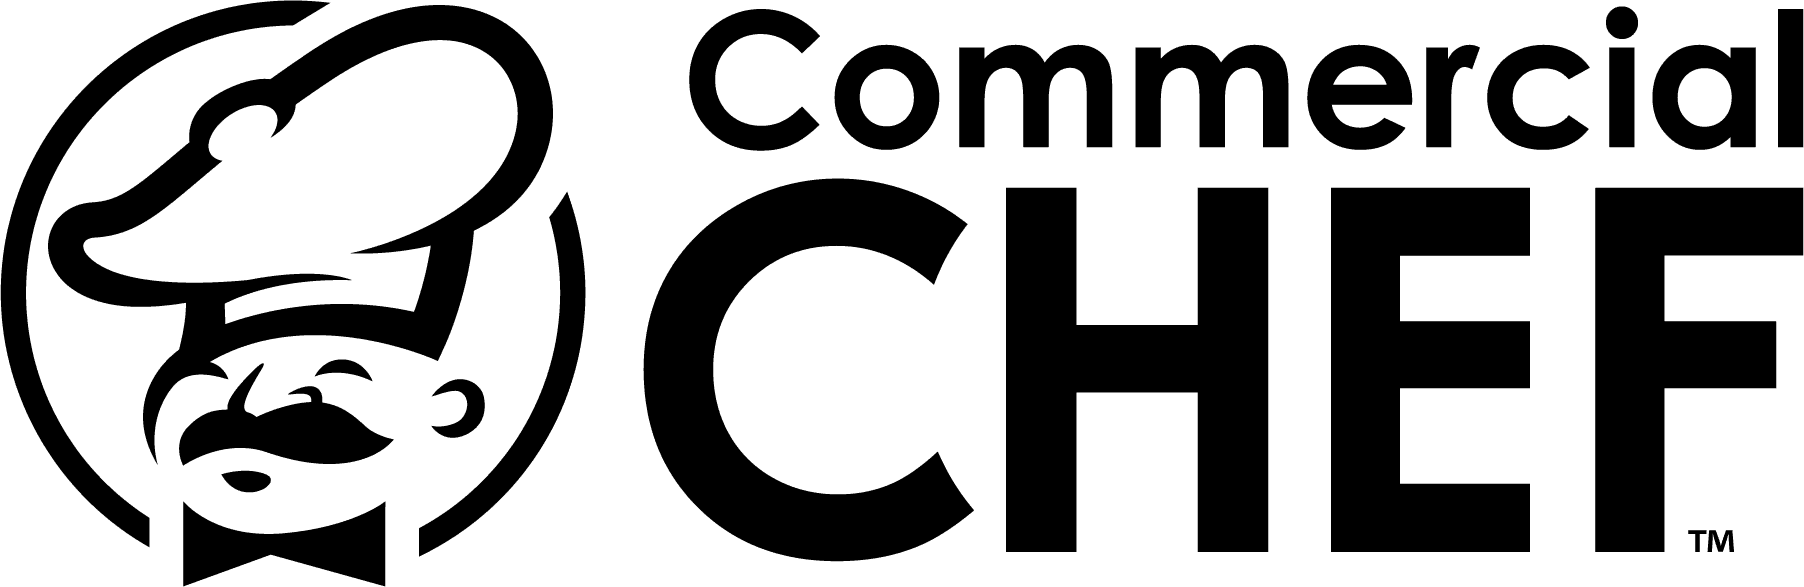 Commercial Chef Logo